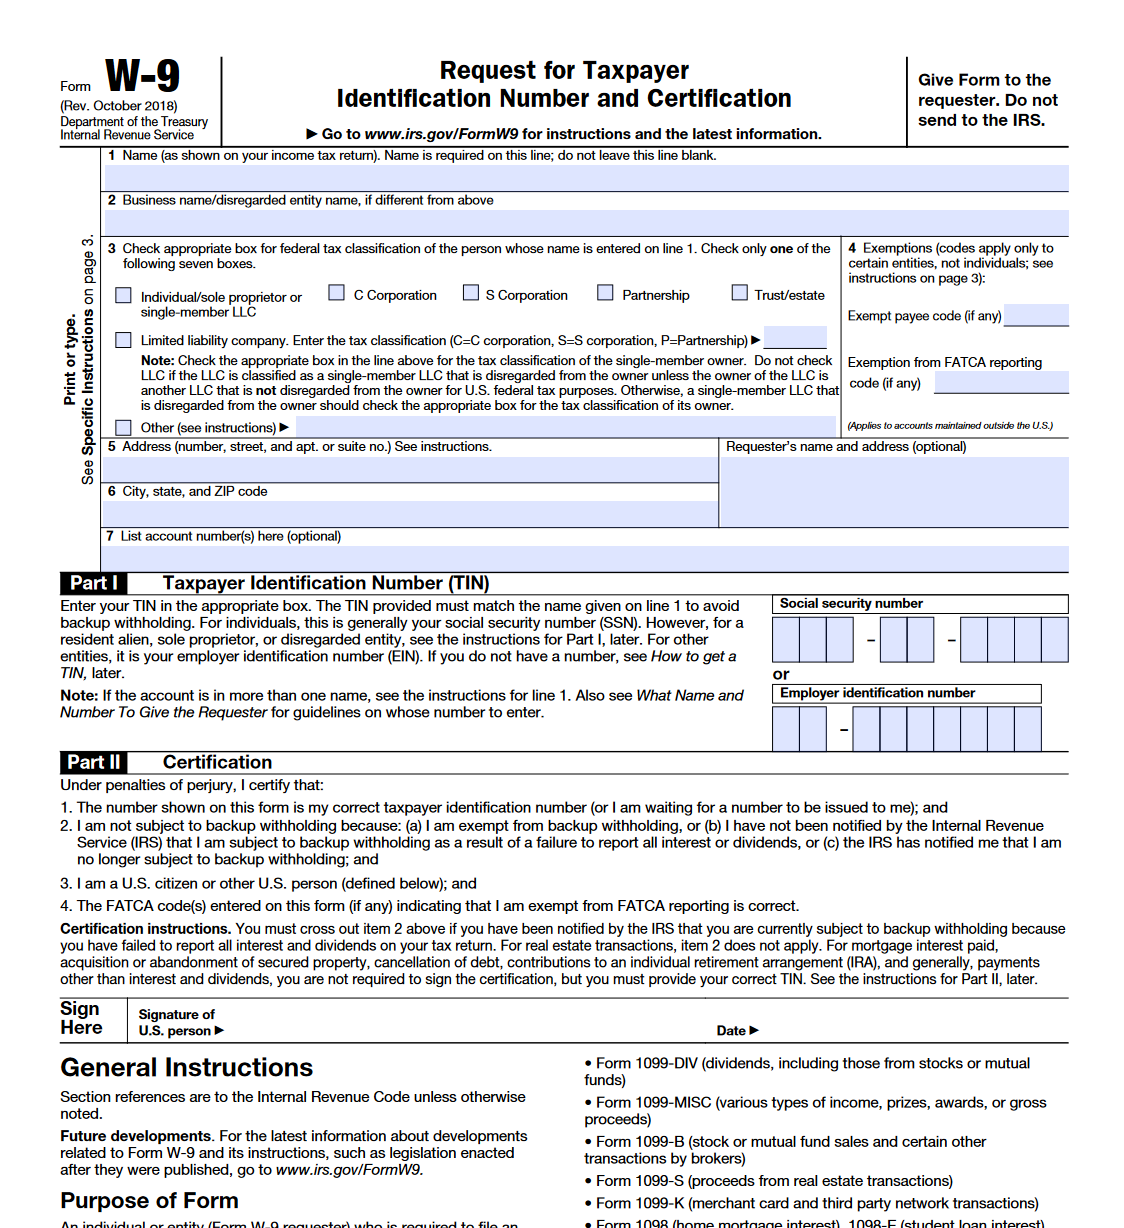 irs-form-w-9-request-for-taxpayer-identification-number-and